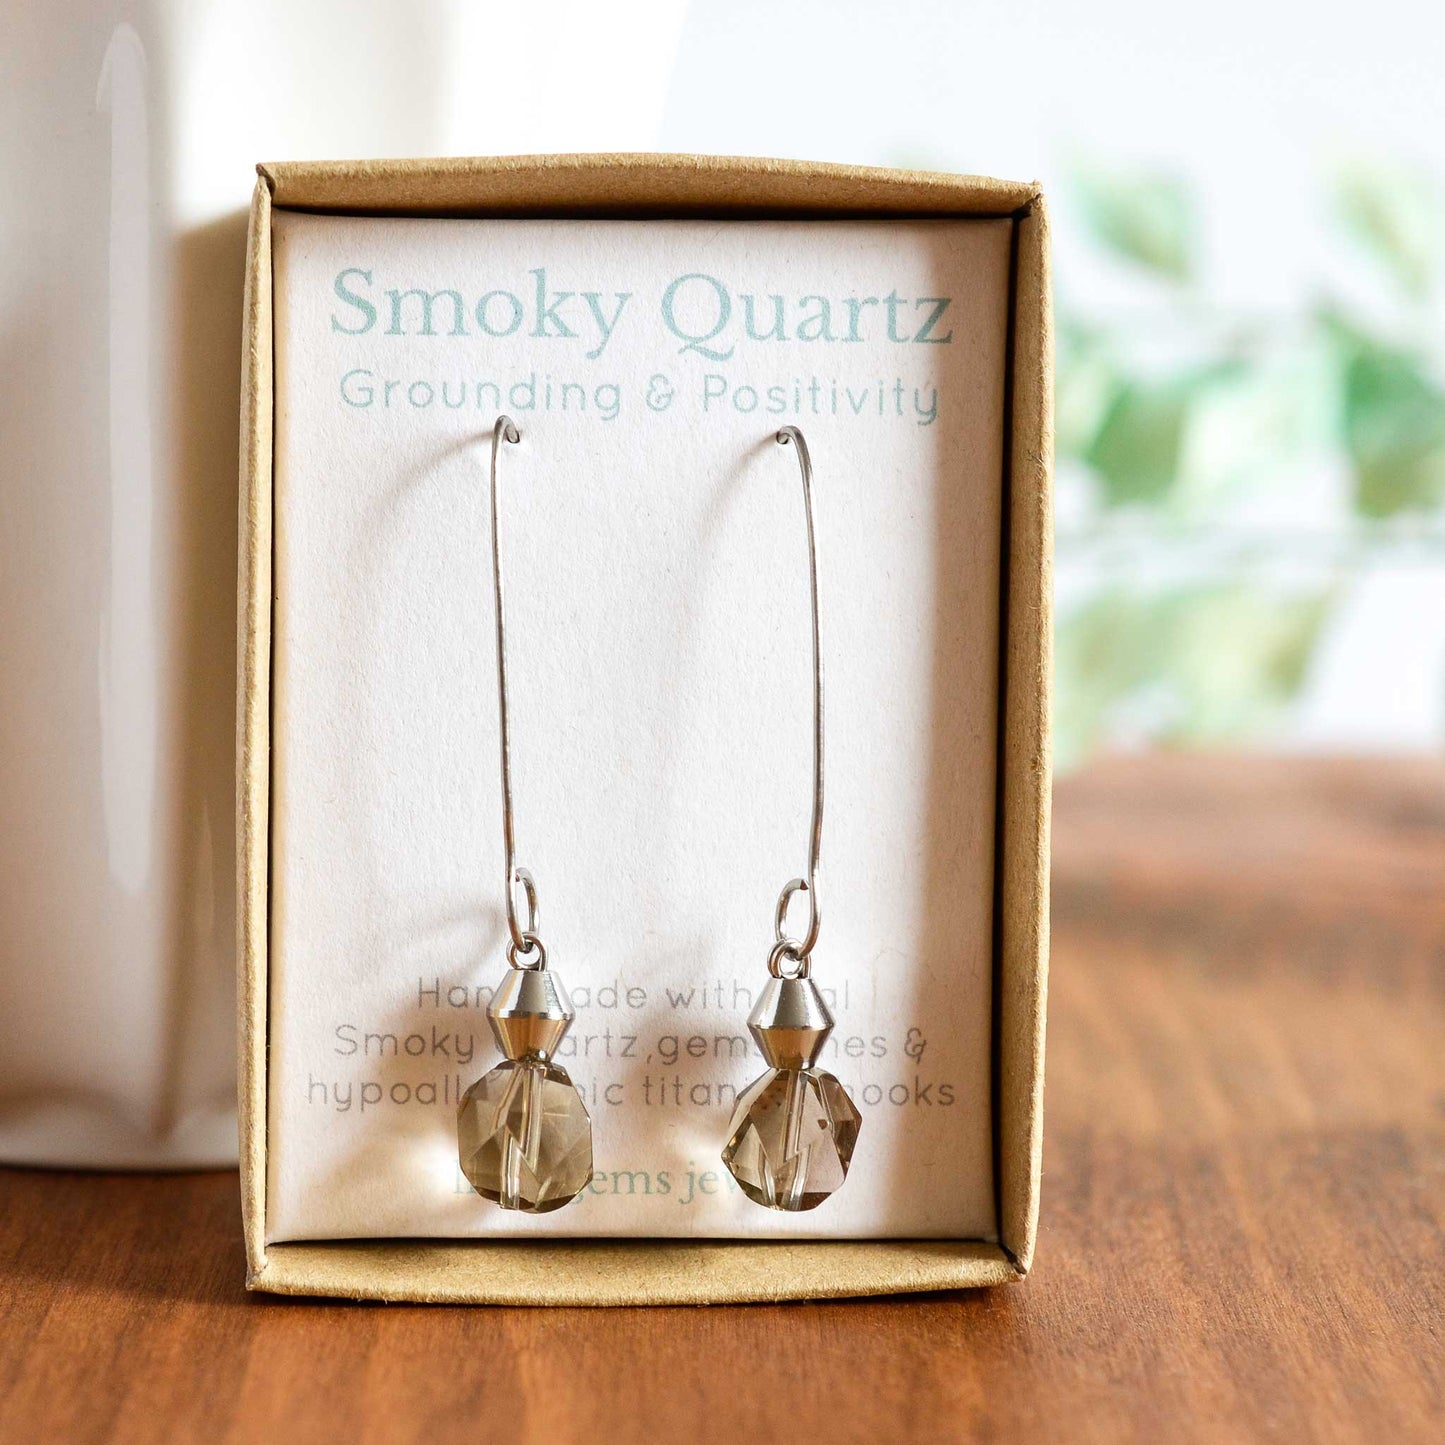 Smoky Quartz crystal for grounding and positivity drop earrings in eco friendly gift box.